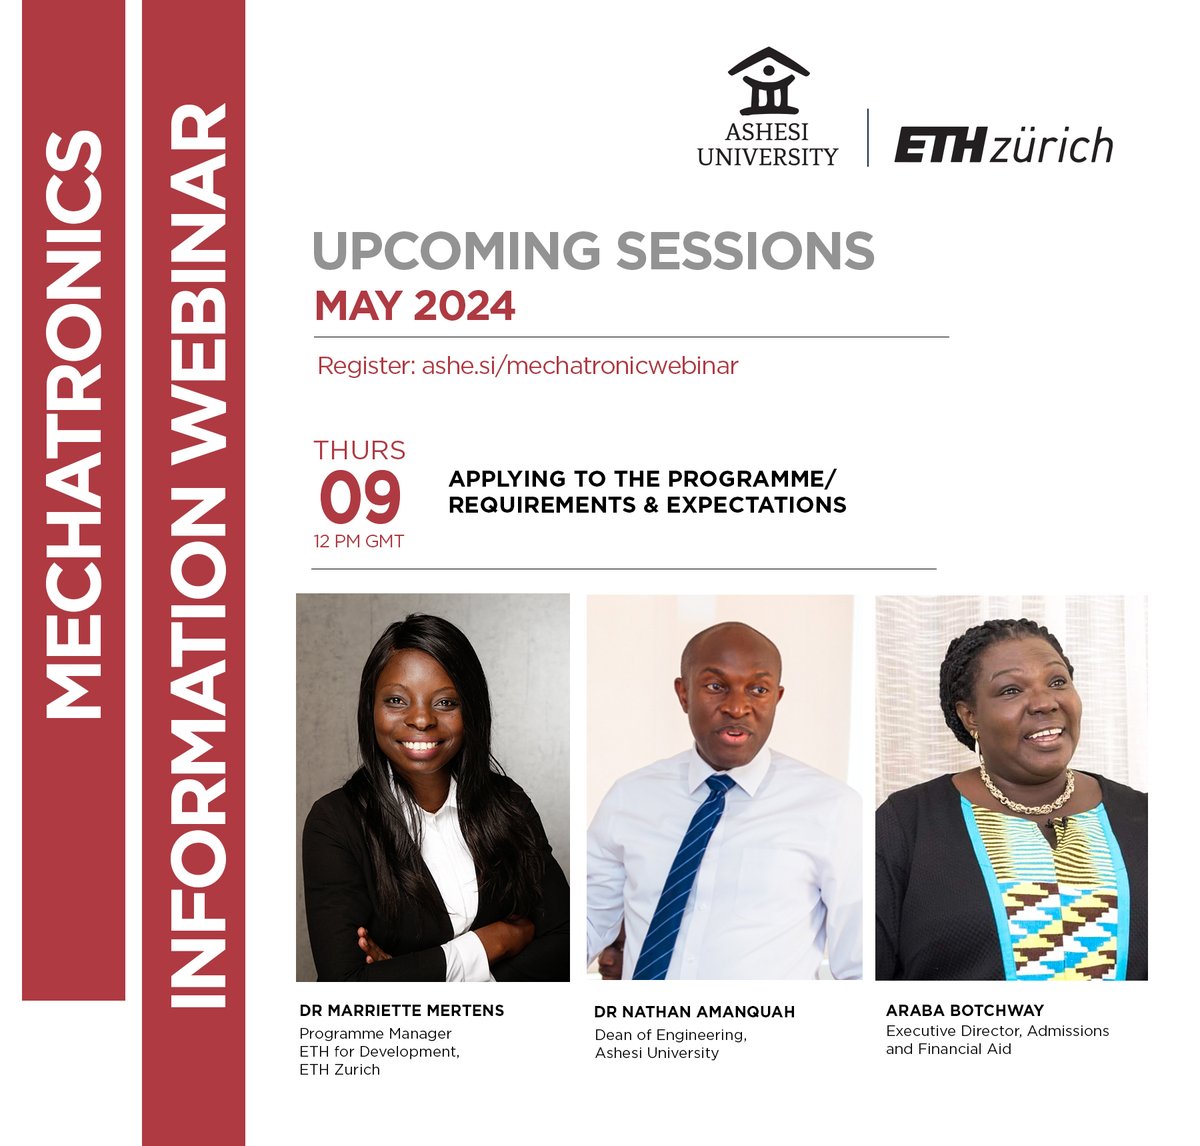 Applications are still open for our joint Master's programme in Mechatronics Engineering with @ETH_en. Join our webinar this Thursday at 12 pm GMT to interact with our faculty and admissions team. Sign up here: ashe.si/mechatronicweb… #atAshesi